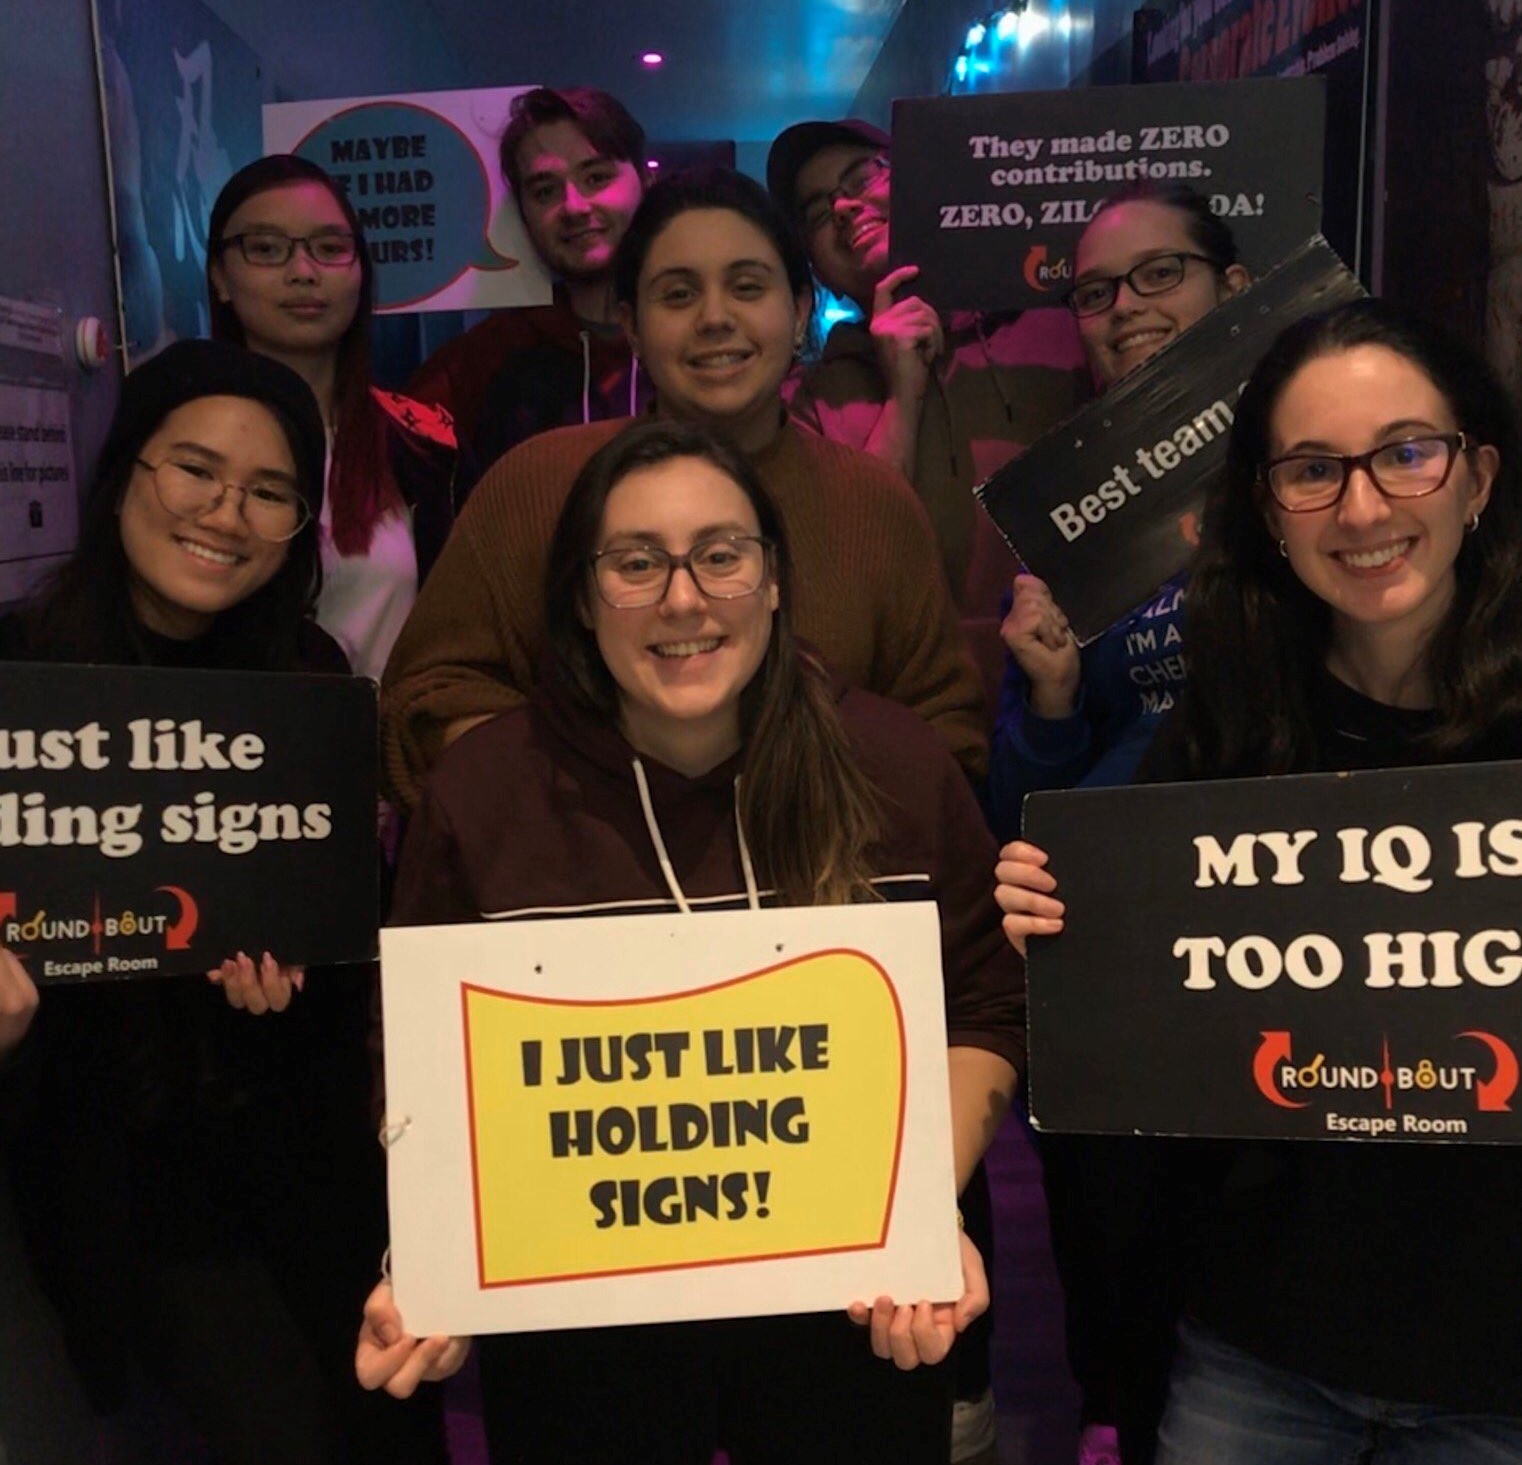 The Foucher, Gossage, Wylie, Adler & Impellizzeri Groups in an escape room